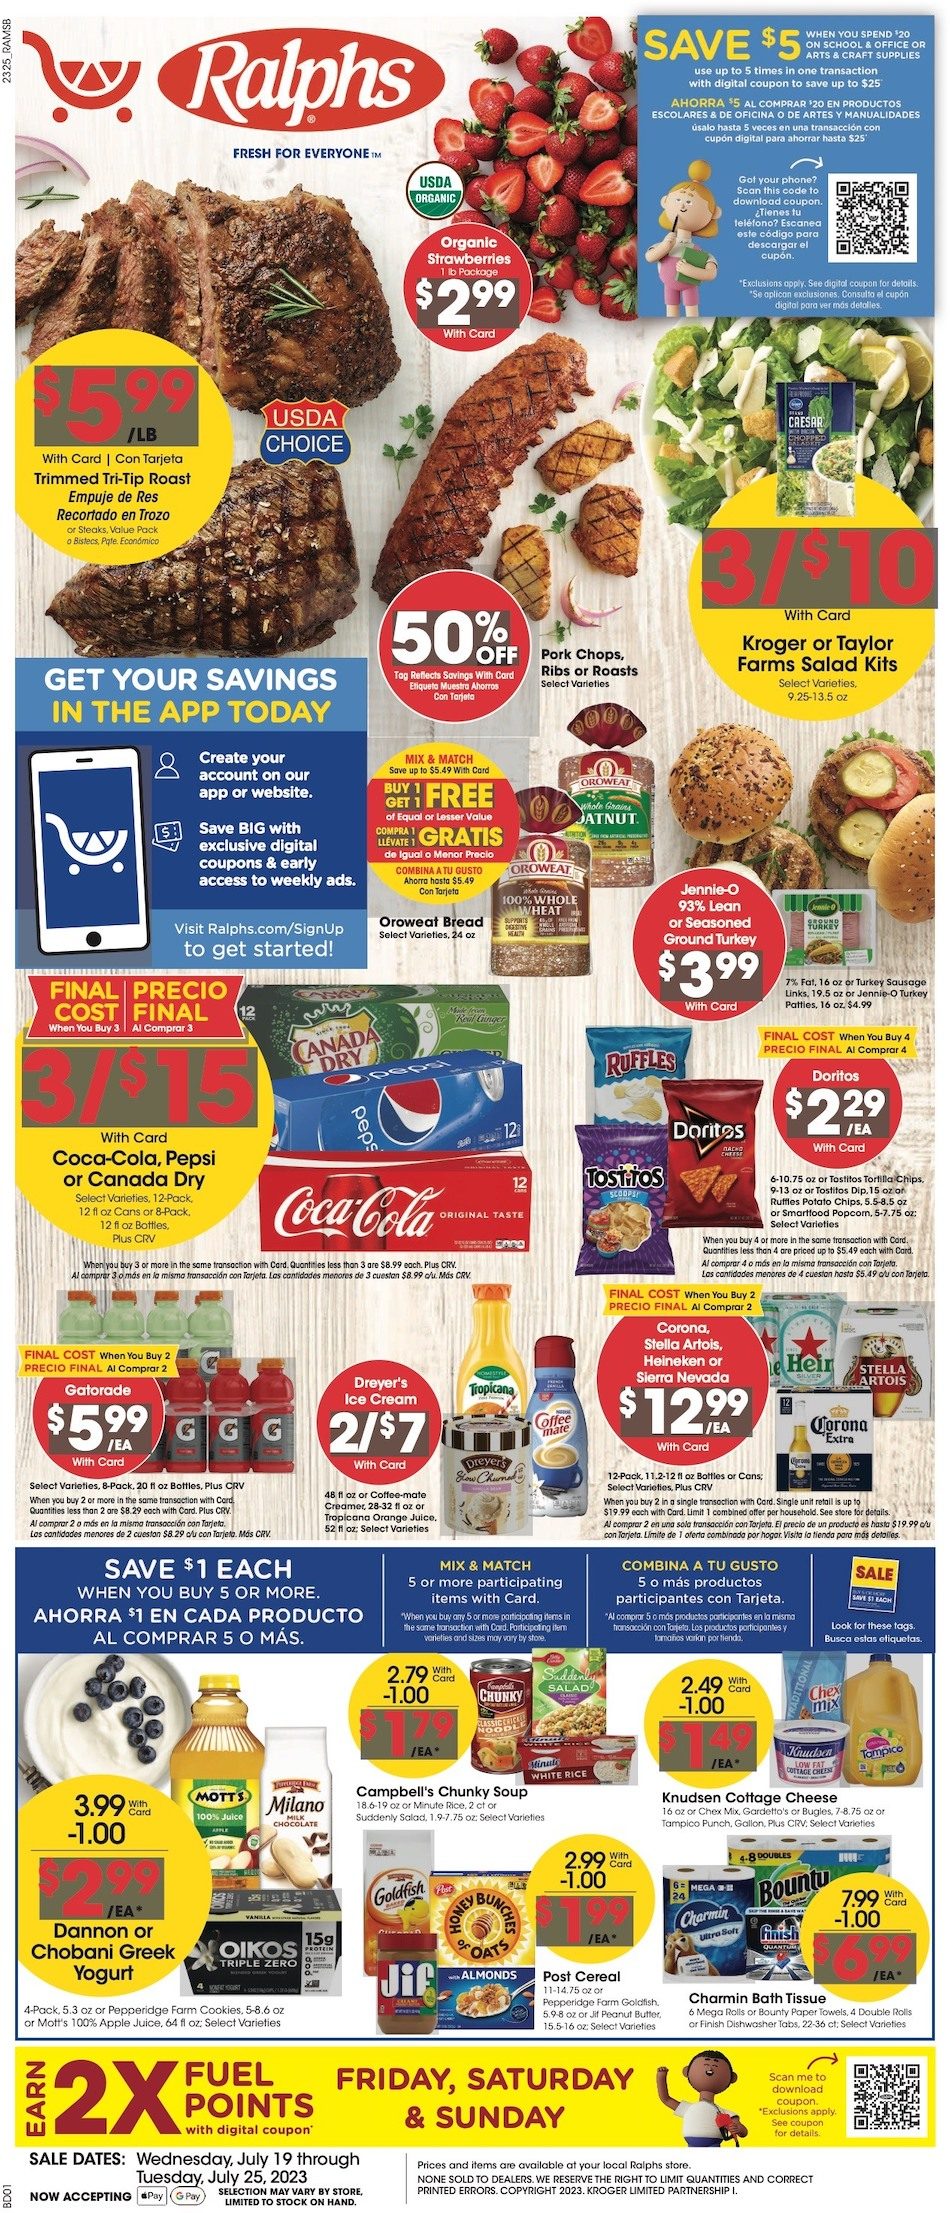 Ralphs Weekly Ad 19th – 25th July 2023 Page 1